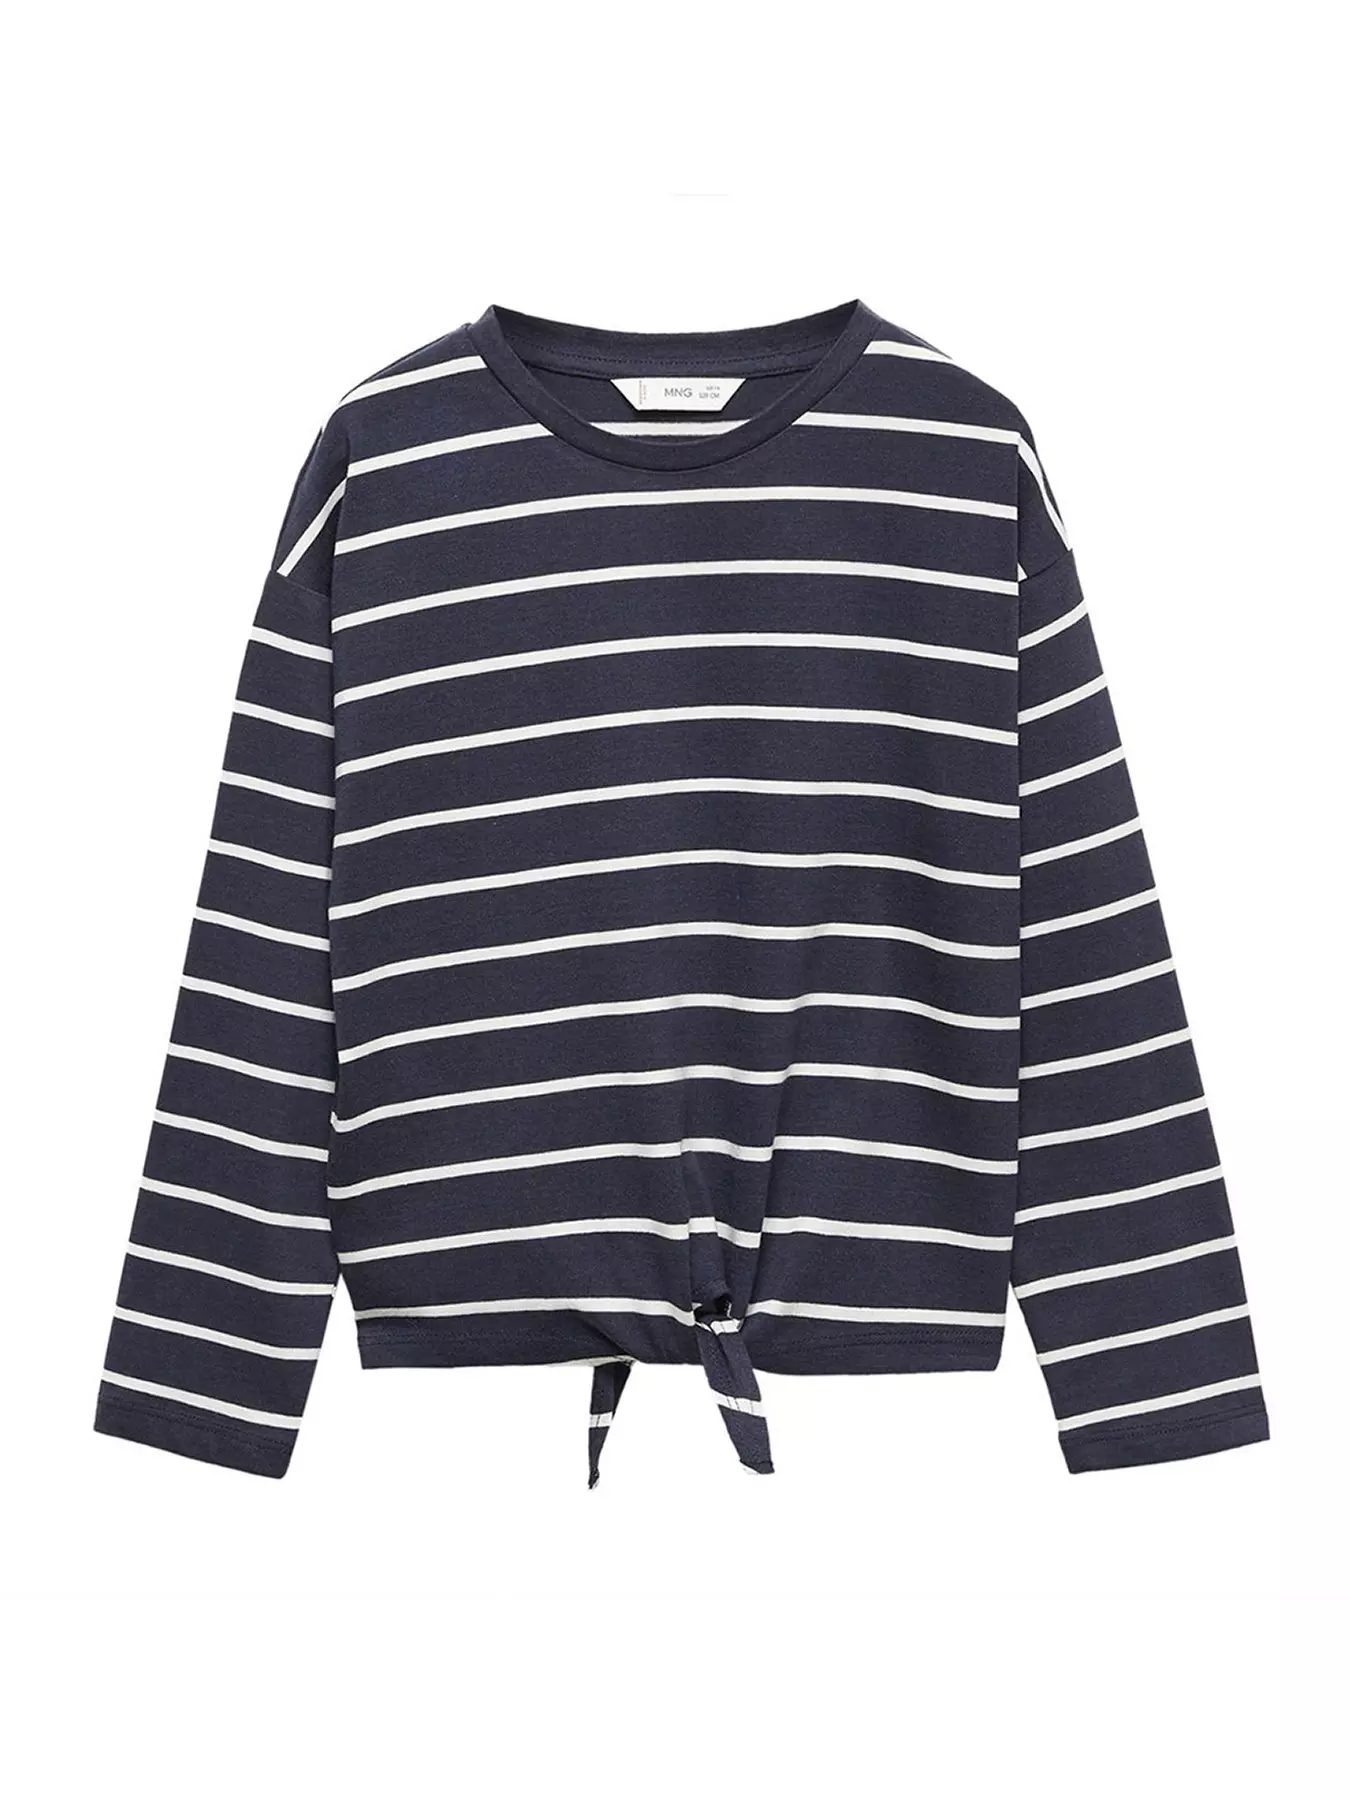 PRIMARK CHILDREN'S WHITE Long Sleeve Thermal Cotton Top11/12 Years+ West  13/14 £6.80 - PicClick UK